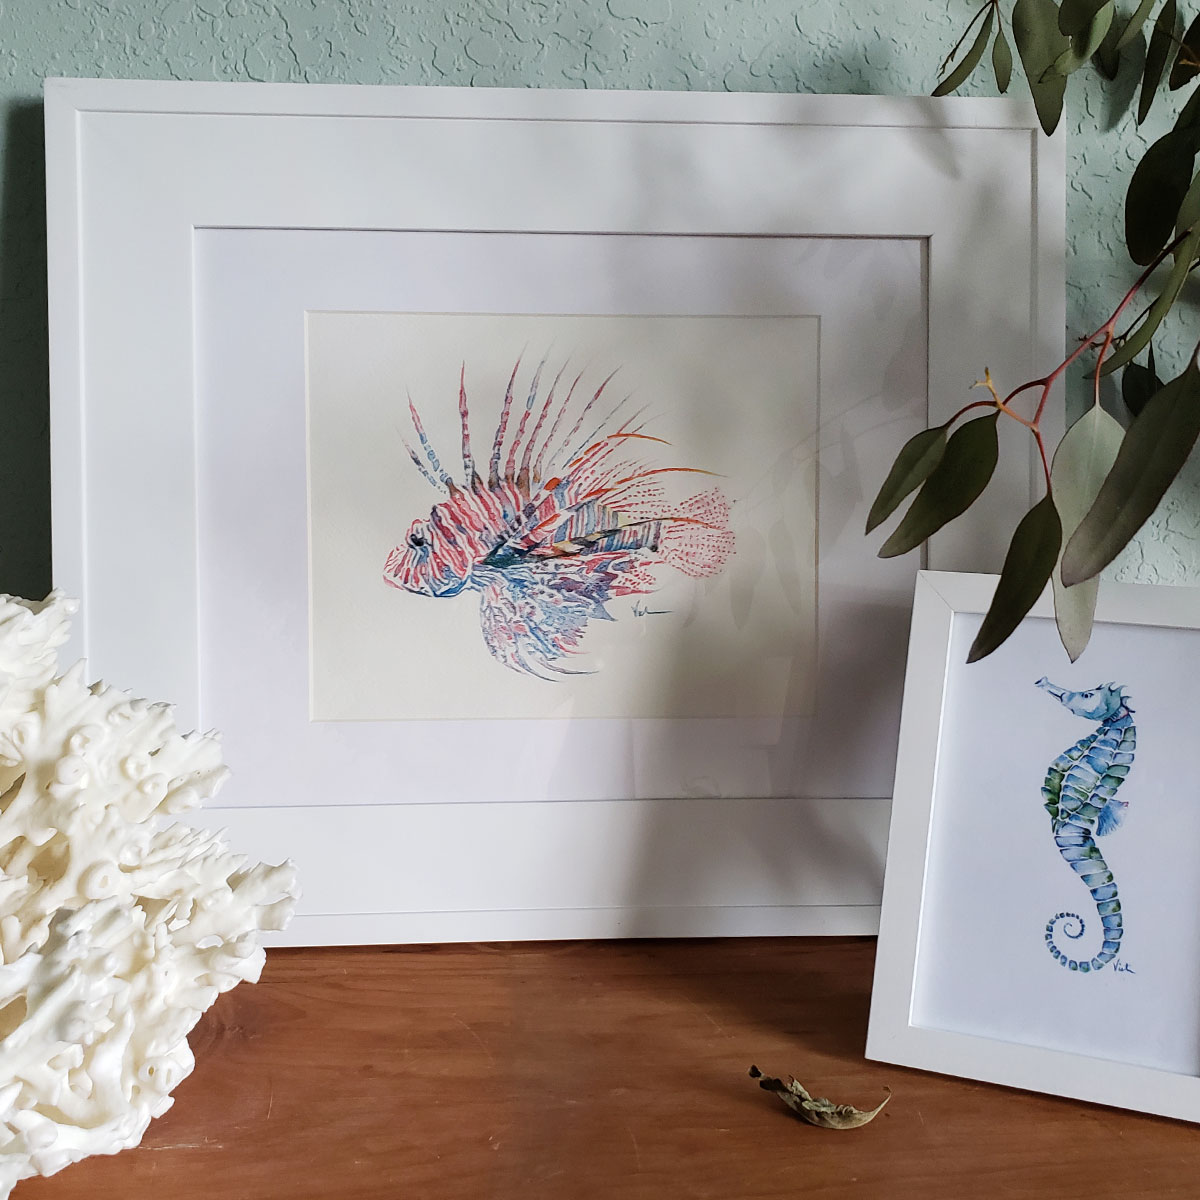 Watercolor Lion Fish painting by Victoria Grigaliunas was accepted to the APBC Summer Dreams Juried Exhibit. 